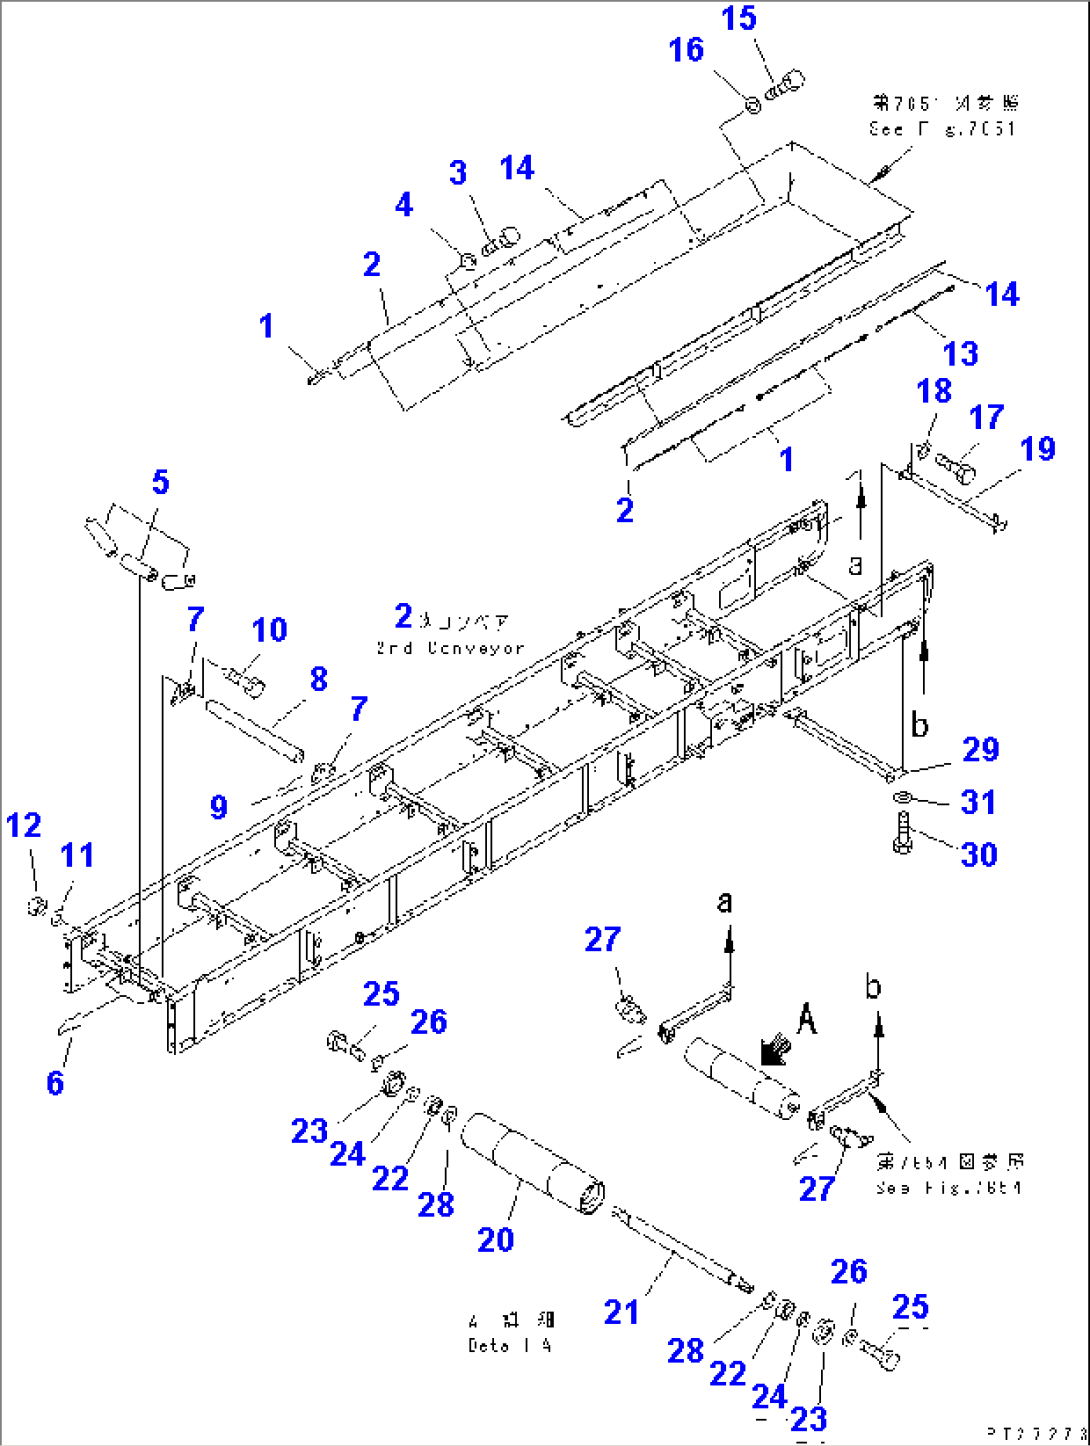 2ND CONVEYOR (INNER PARTS) (3/10) (600MM WIDTH) (WITH EMERGENCY SWITCH)